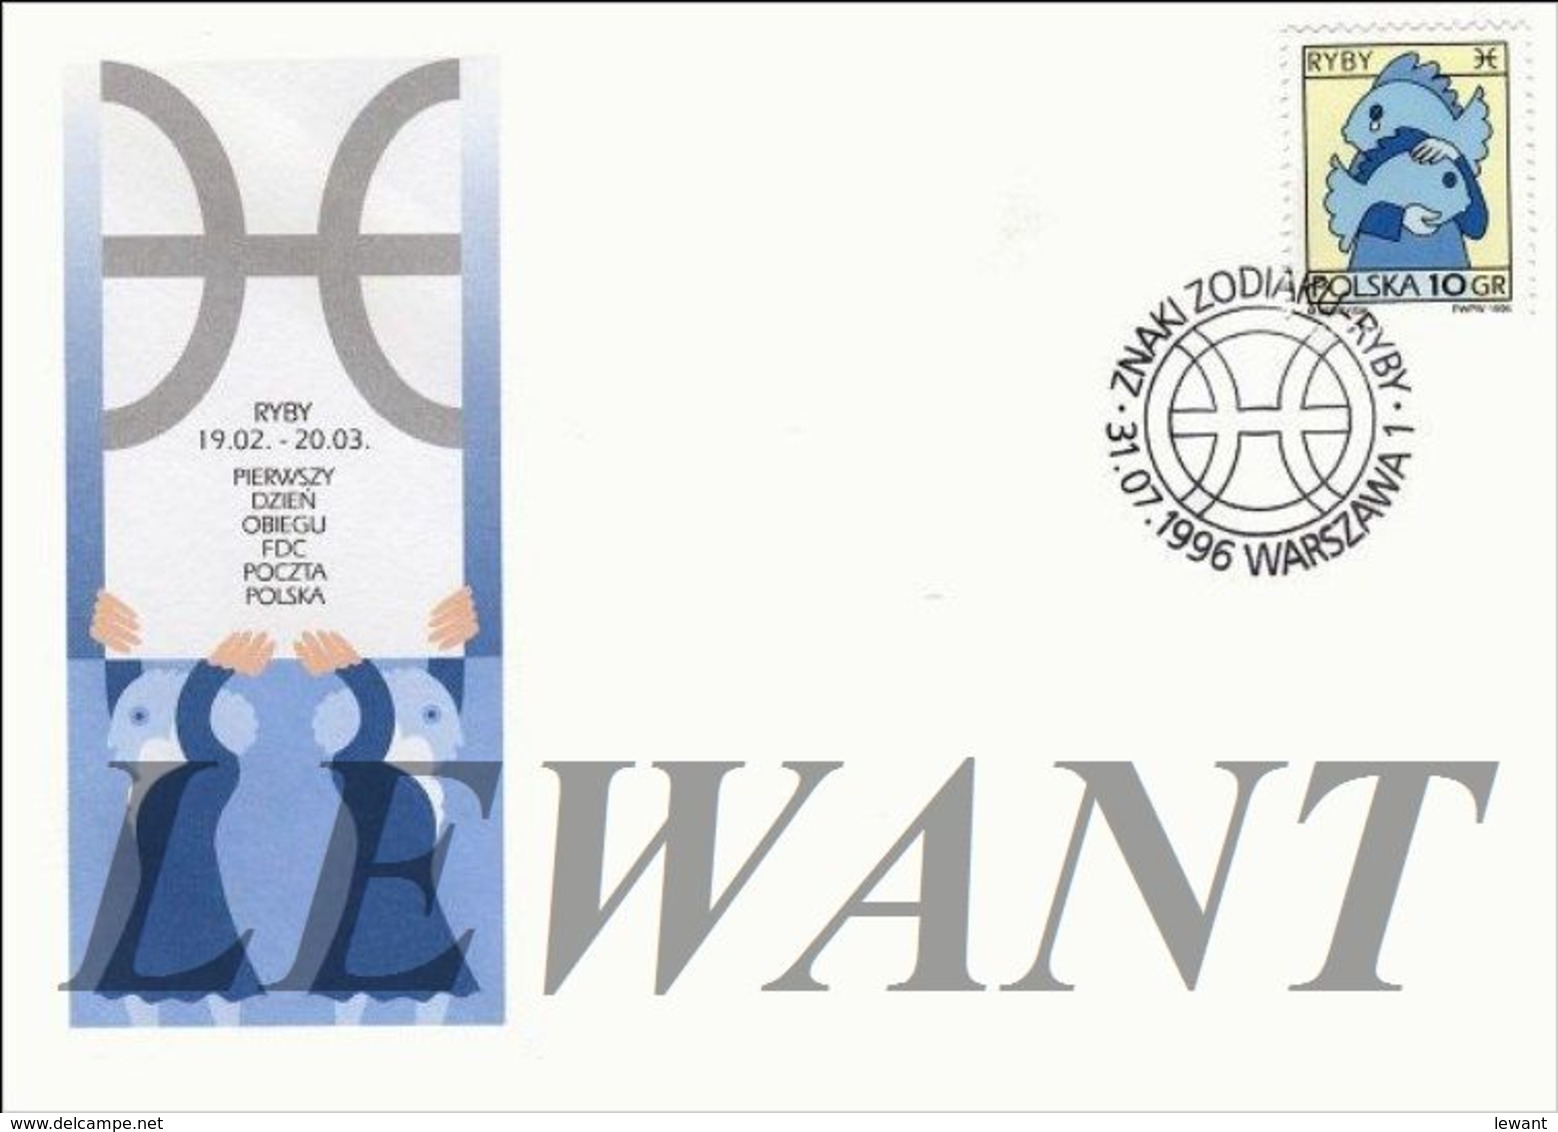 POLAND FDC - a complete 1996 year